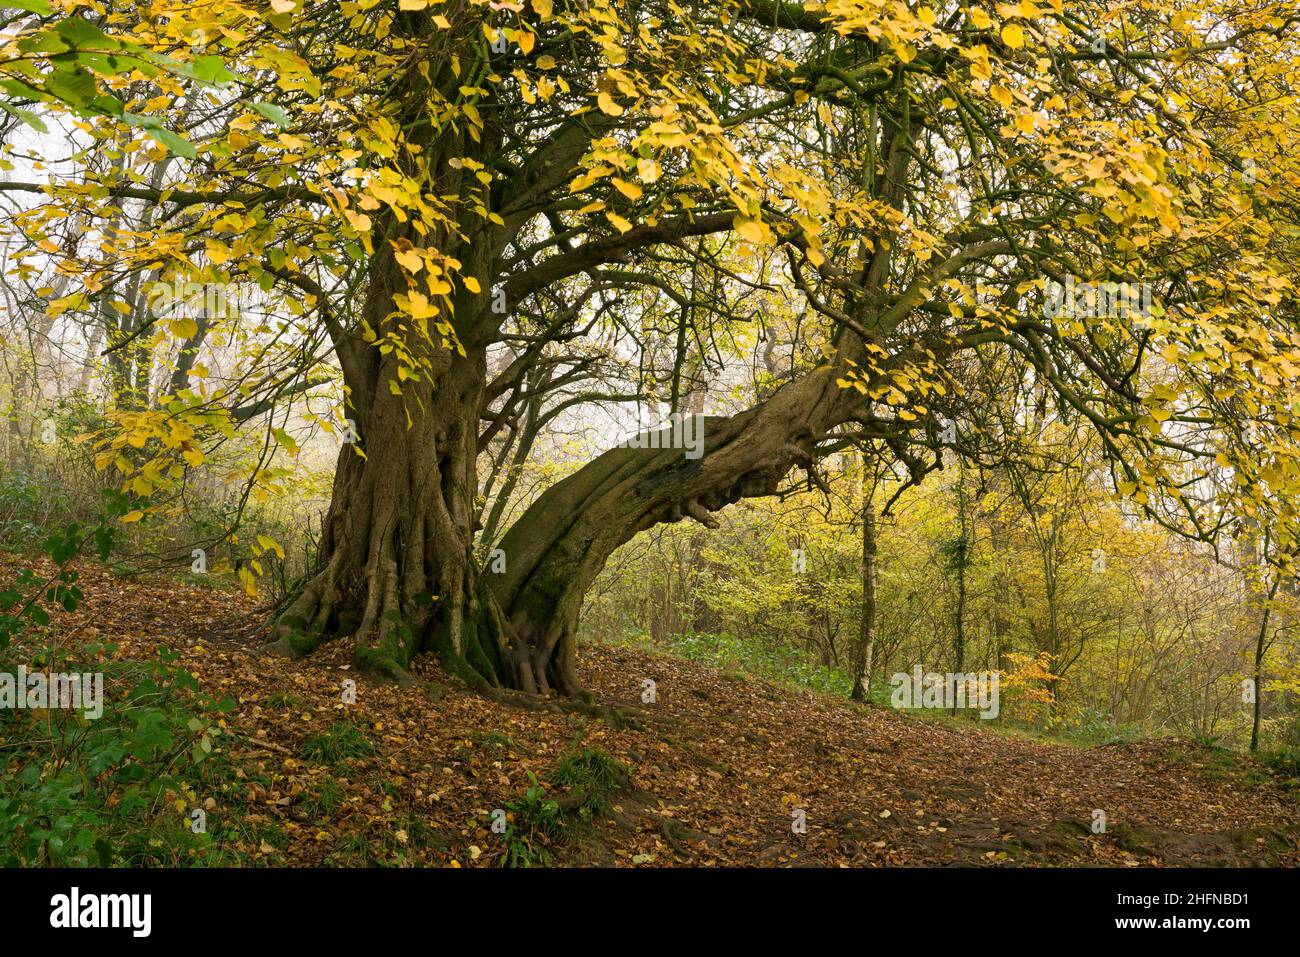 Small-leaved lime (Tilia cordata) tree in King's Wood, an ancient broadleaf woodland in the Mendip Hills Area of Outstanding Natural Beauty, Somerset, England. Stock Photo